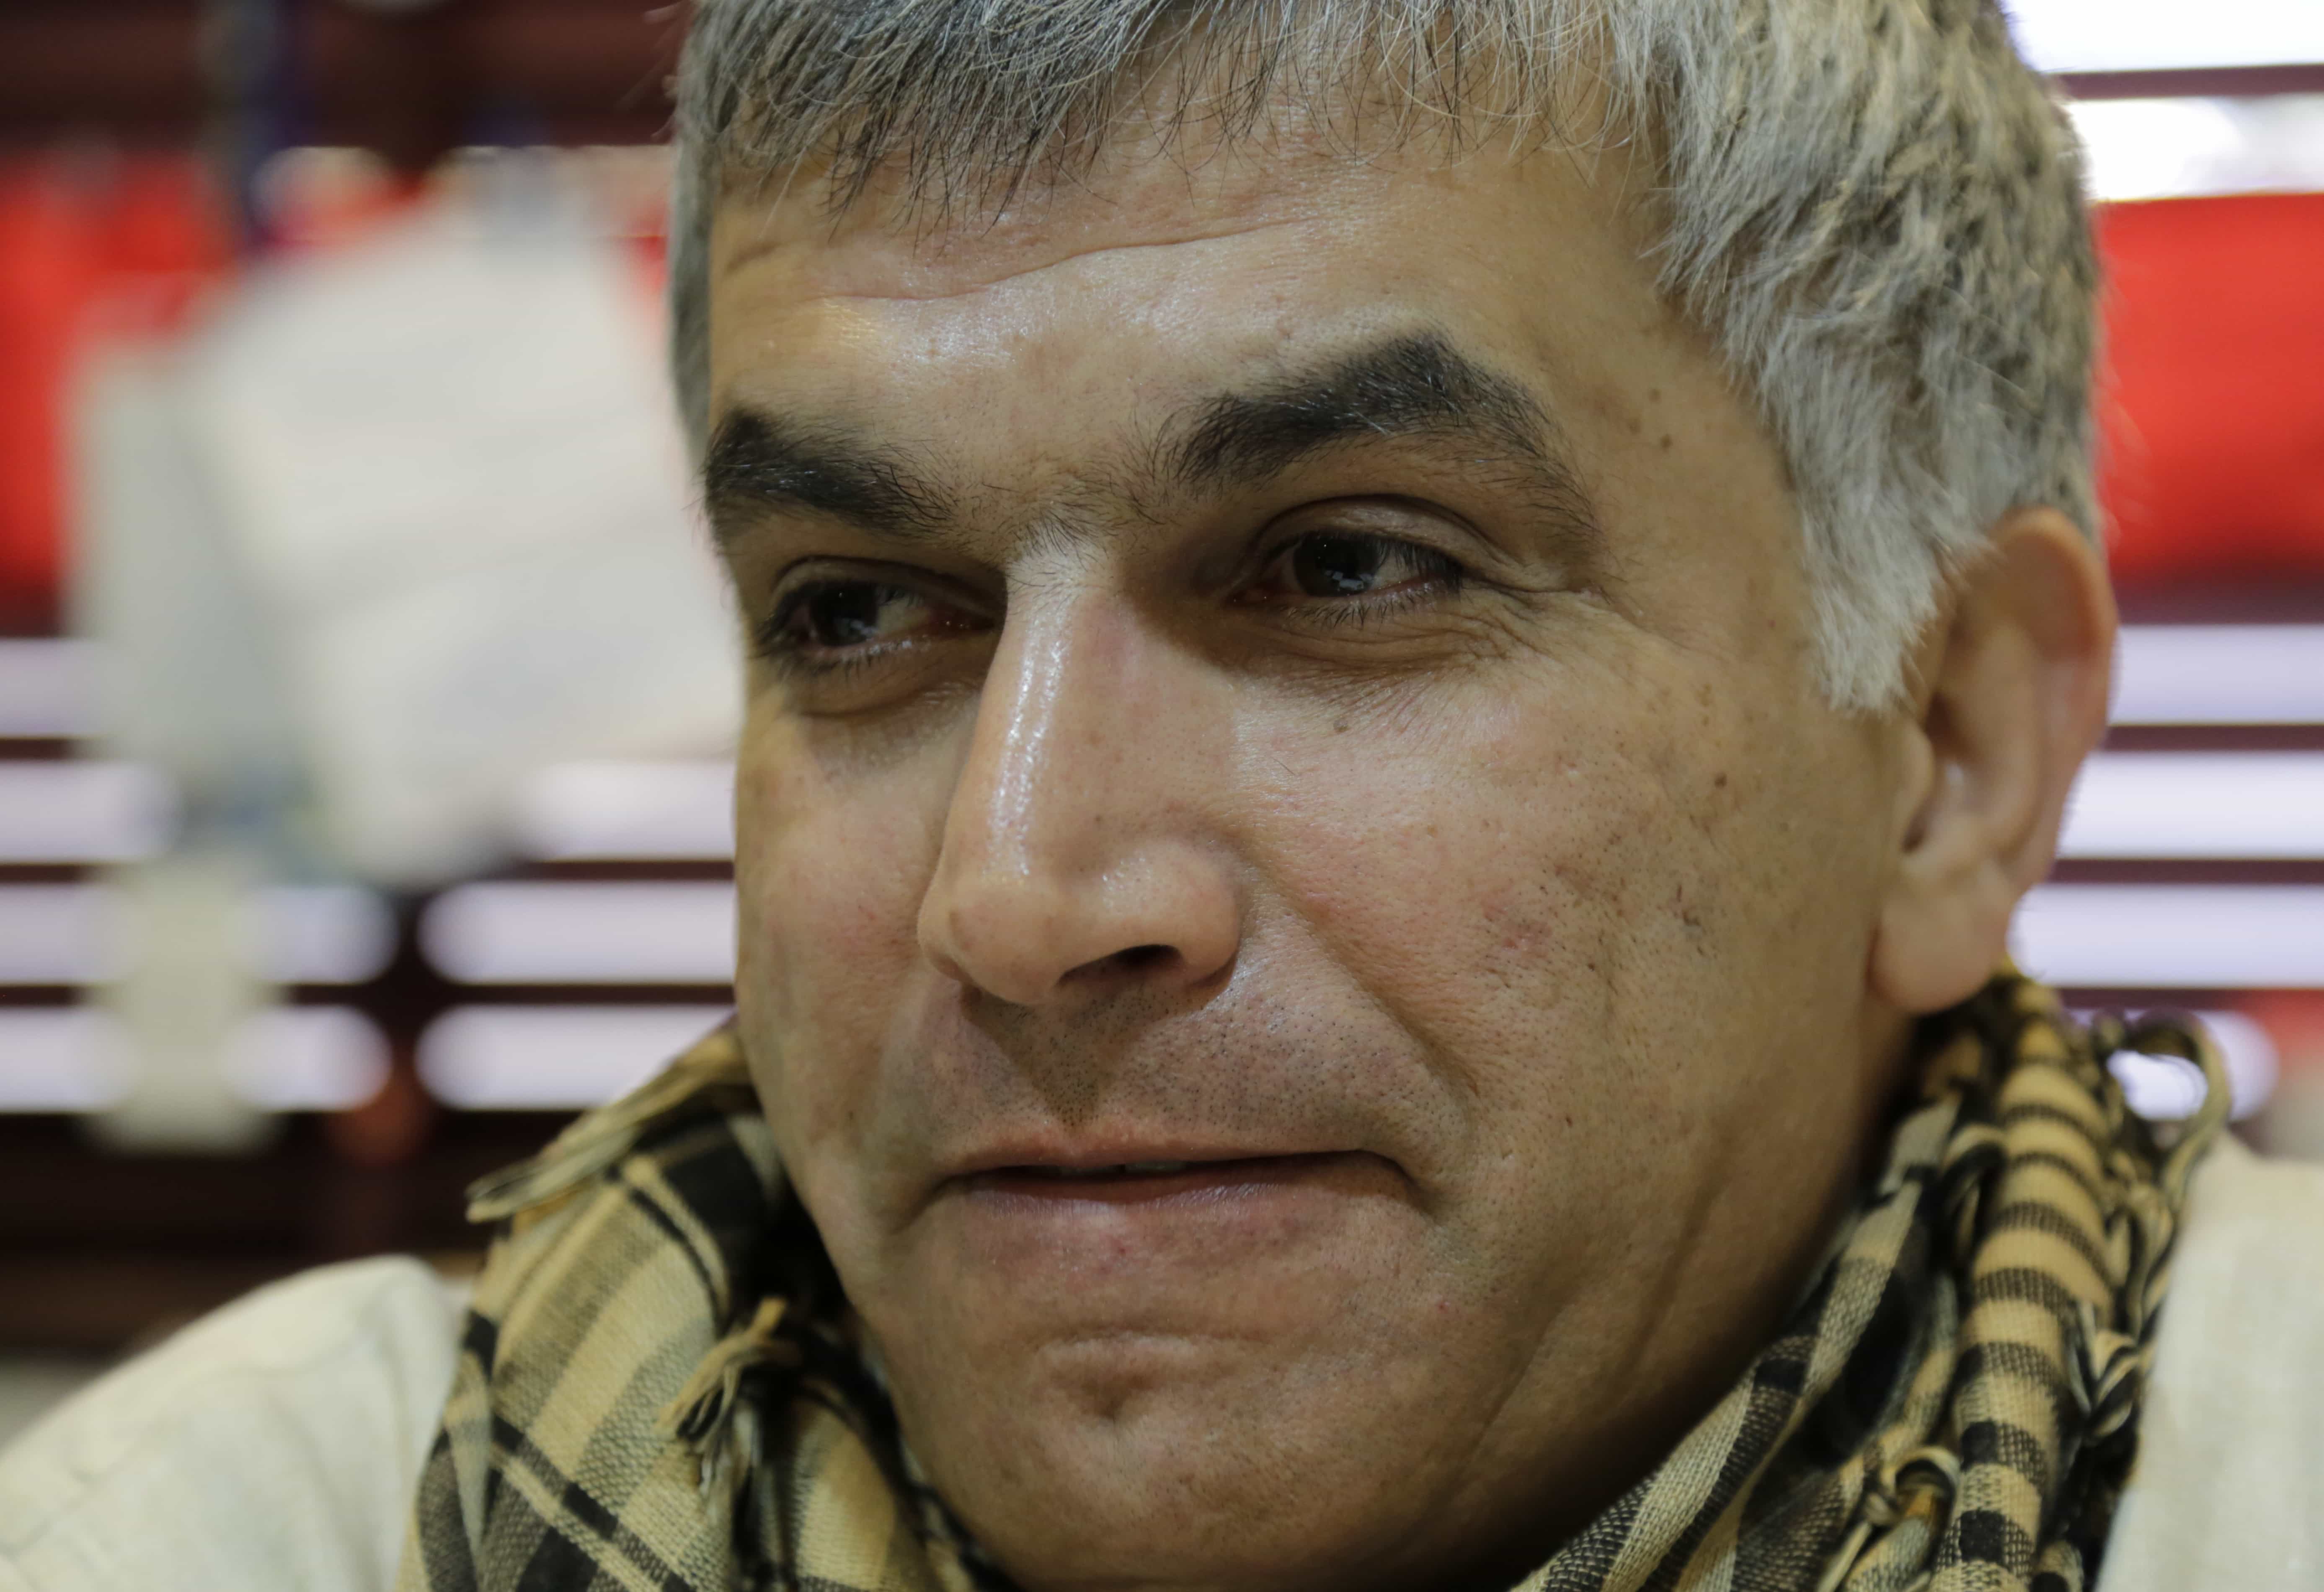 Nabeel Rajab, one of Bahrain's best-known human rights activists, talks to The Associated Press during an interview hours before his conviction on 20 Jan 2015, AP Photo/Hasan Jamali